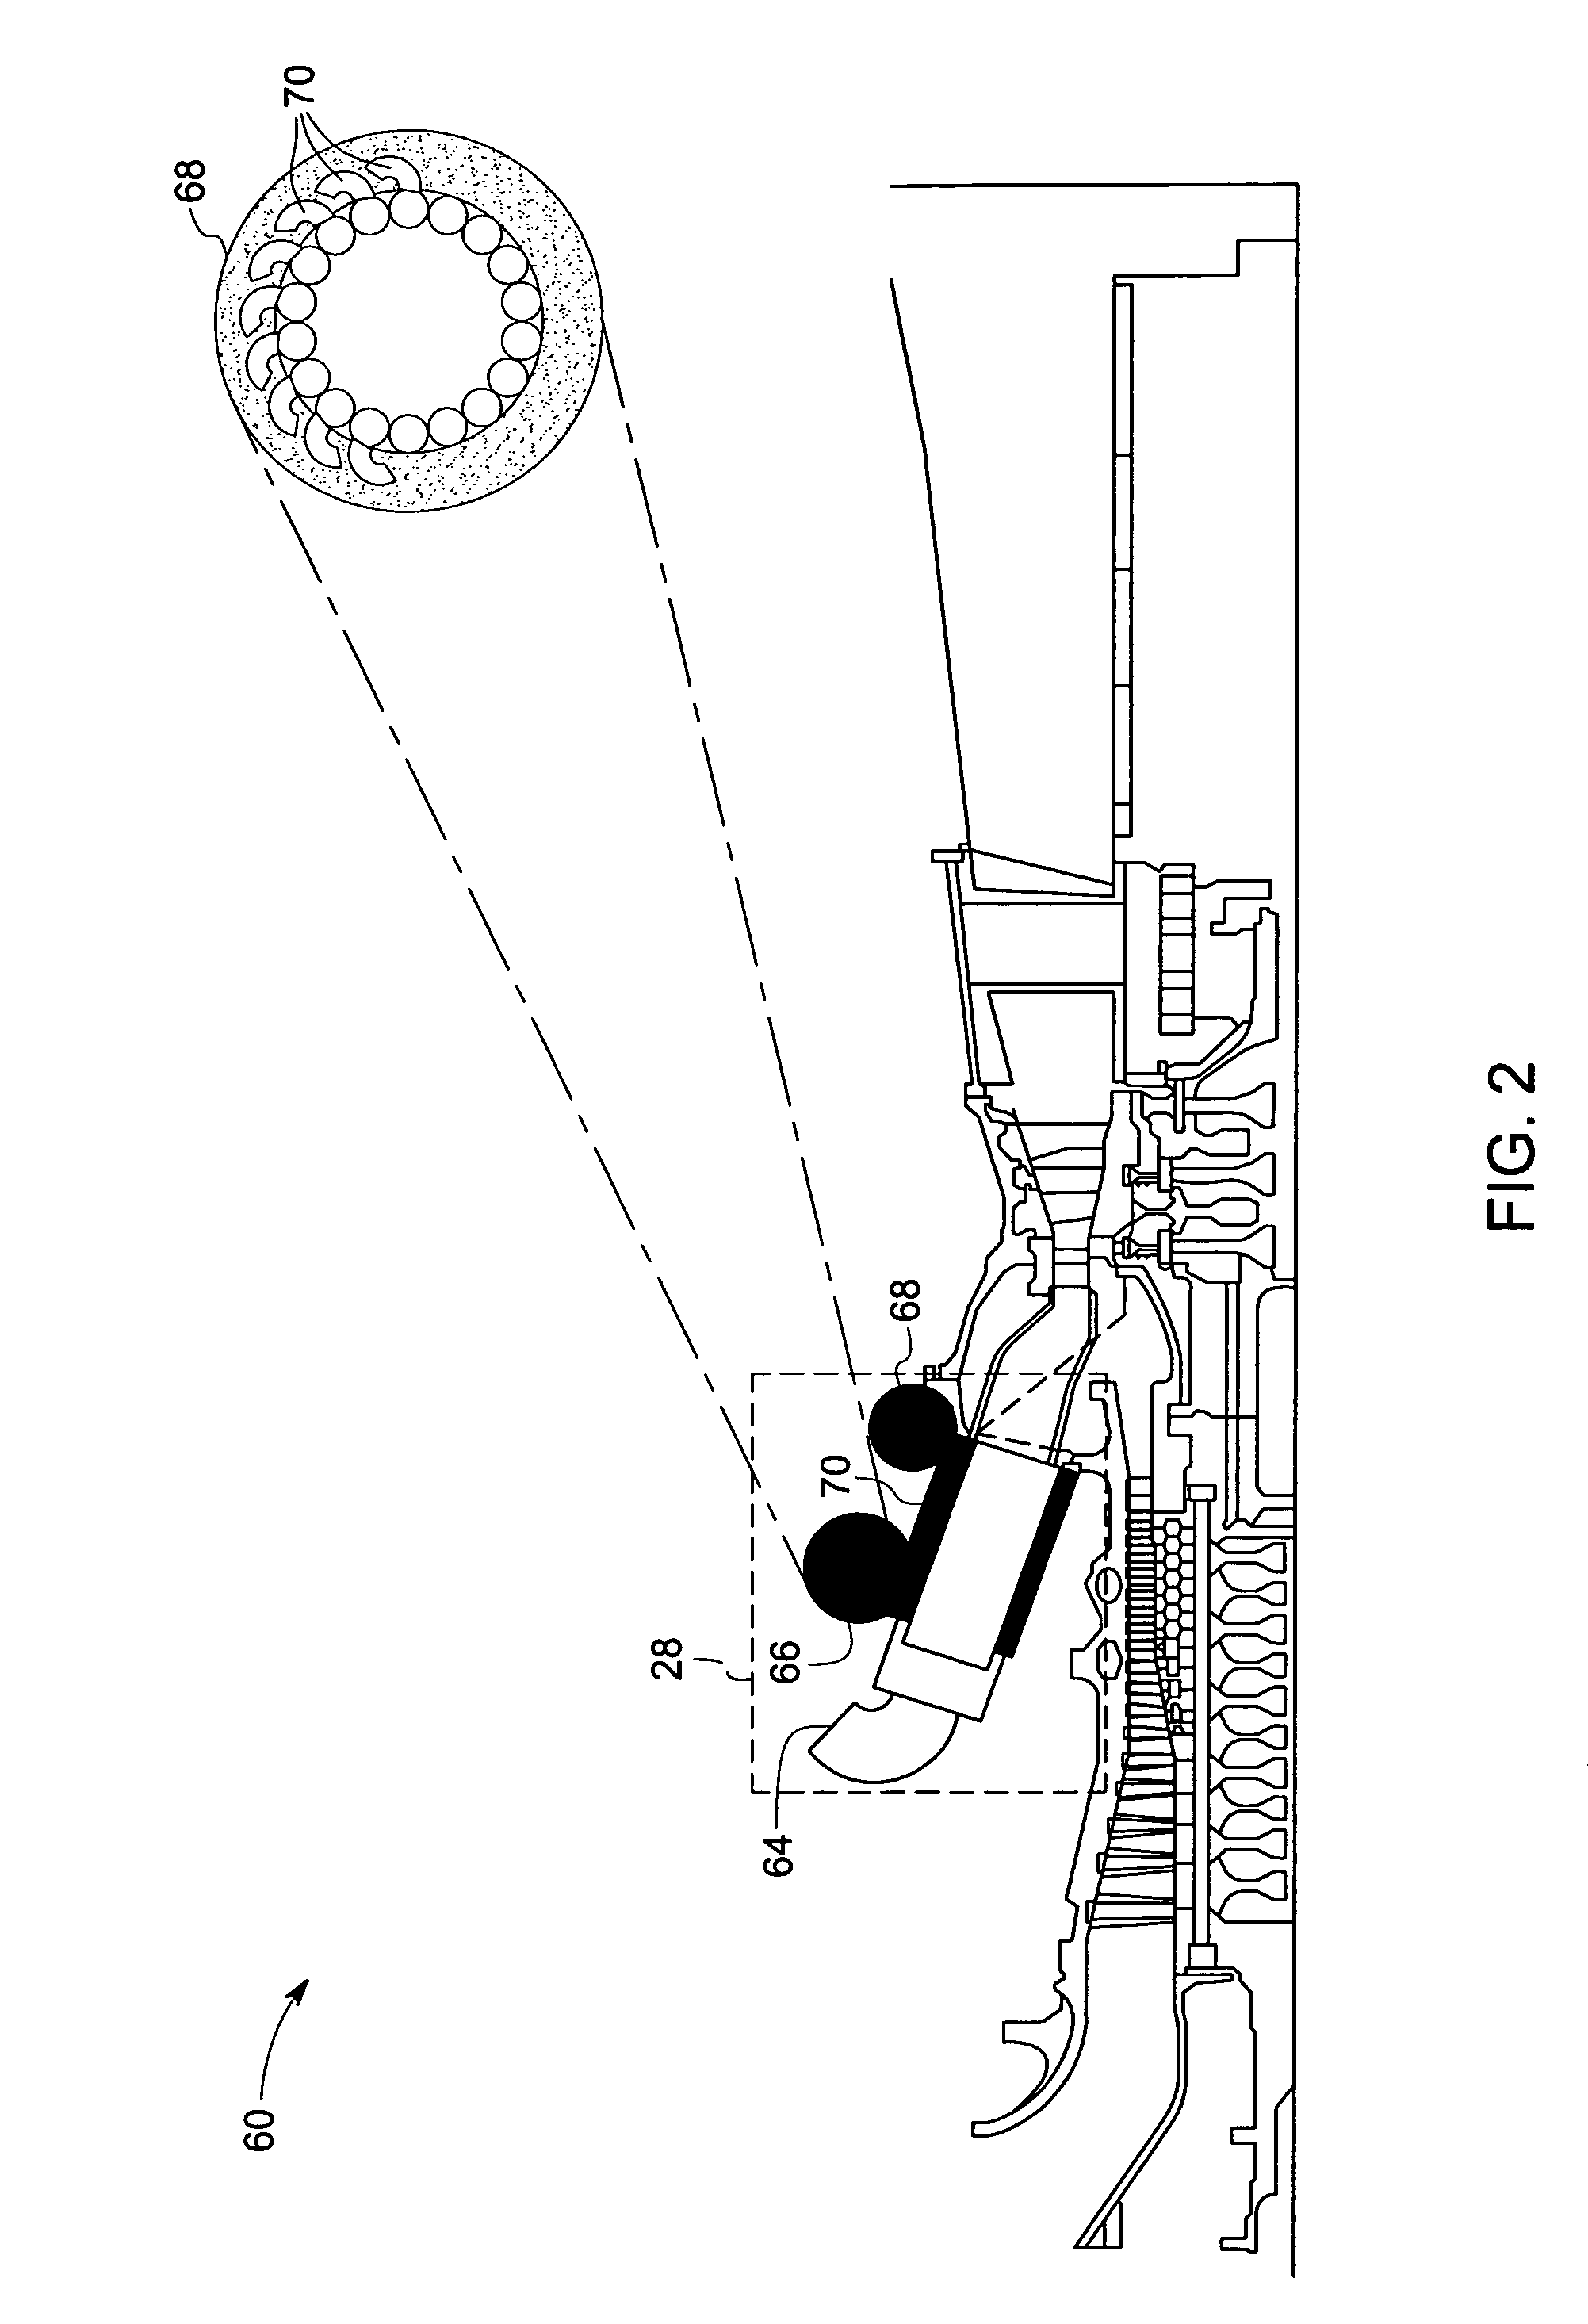 Integrated combustor-heat exchanger and systems for power generation using the same